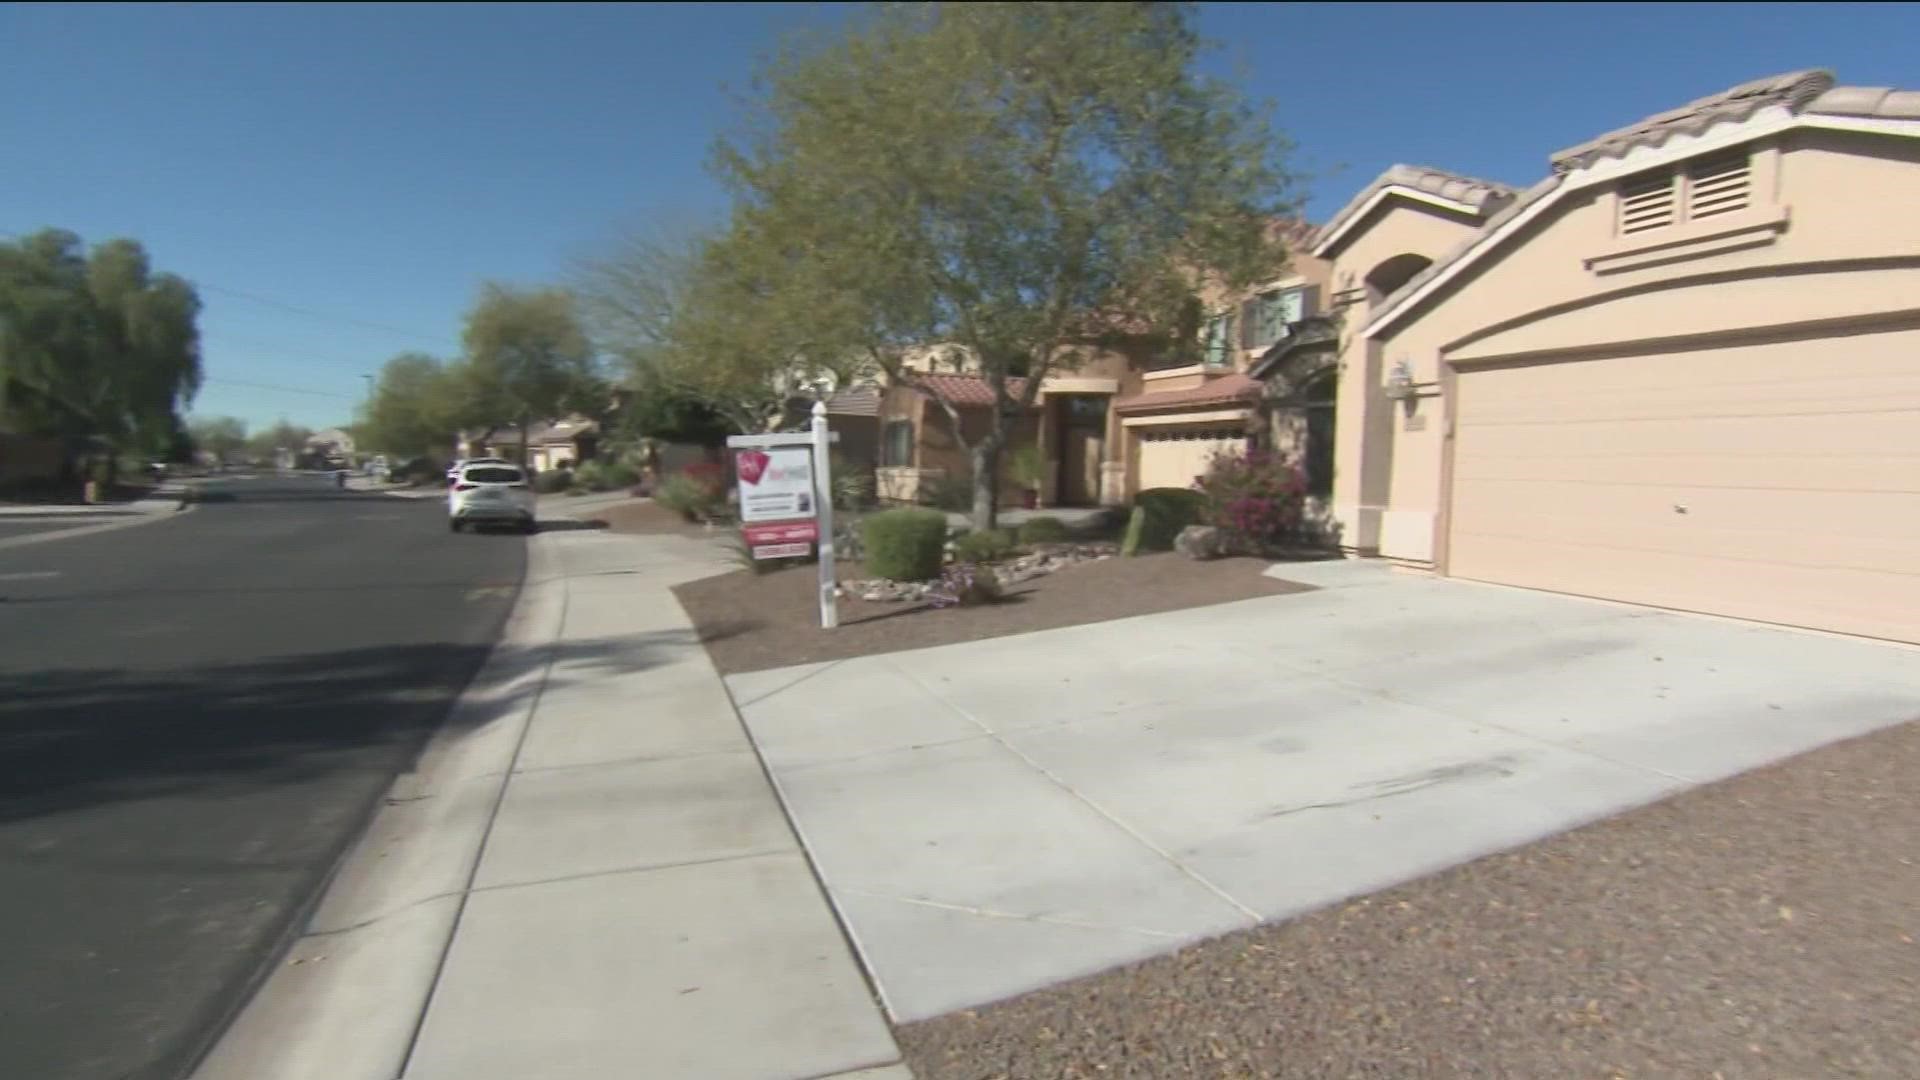 Real estate experts say the Valley's hot housing market has "balanced" out, possibly offering some relief to homebuyers looking to move into Arizona.